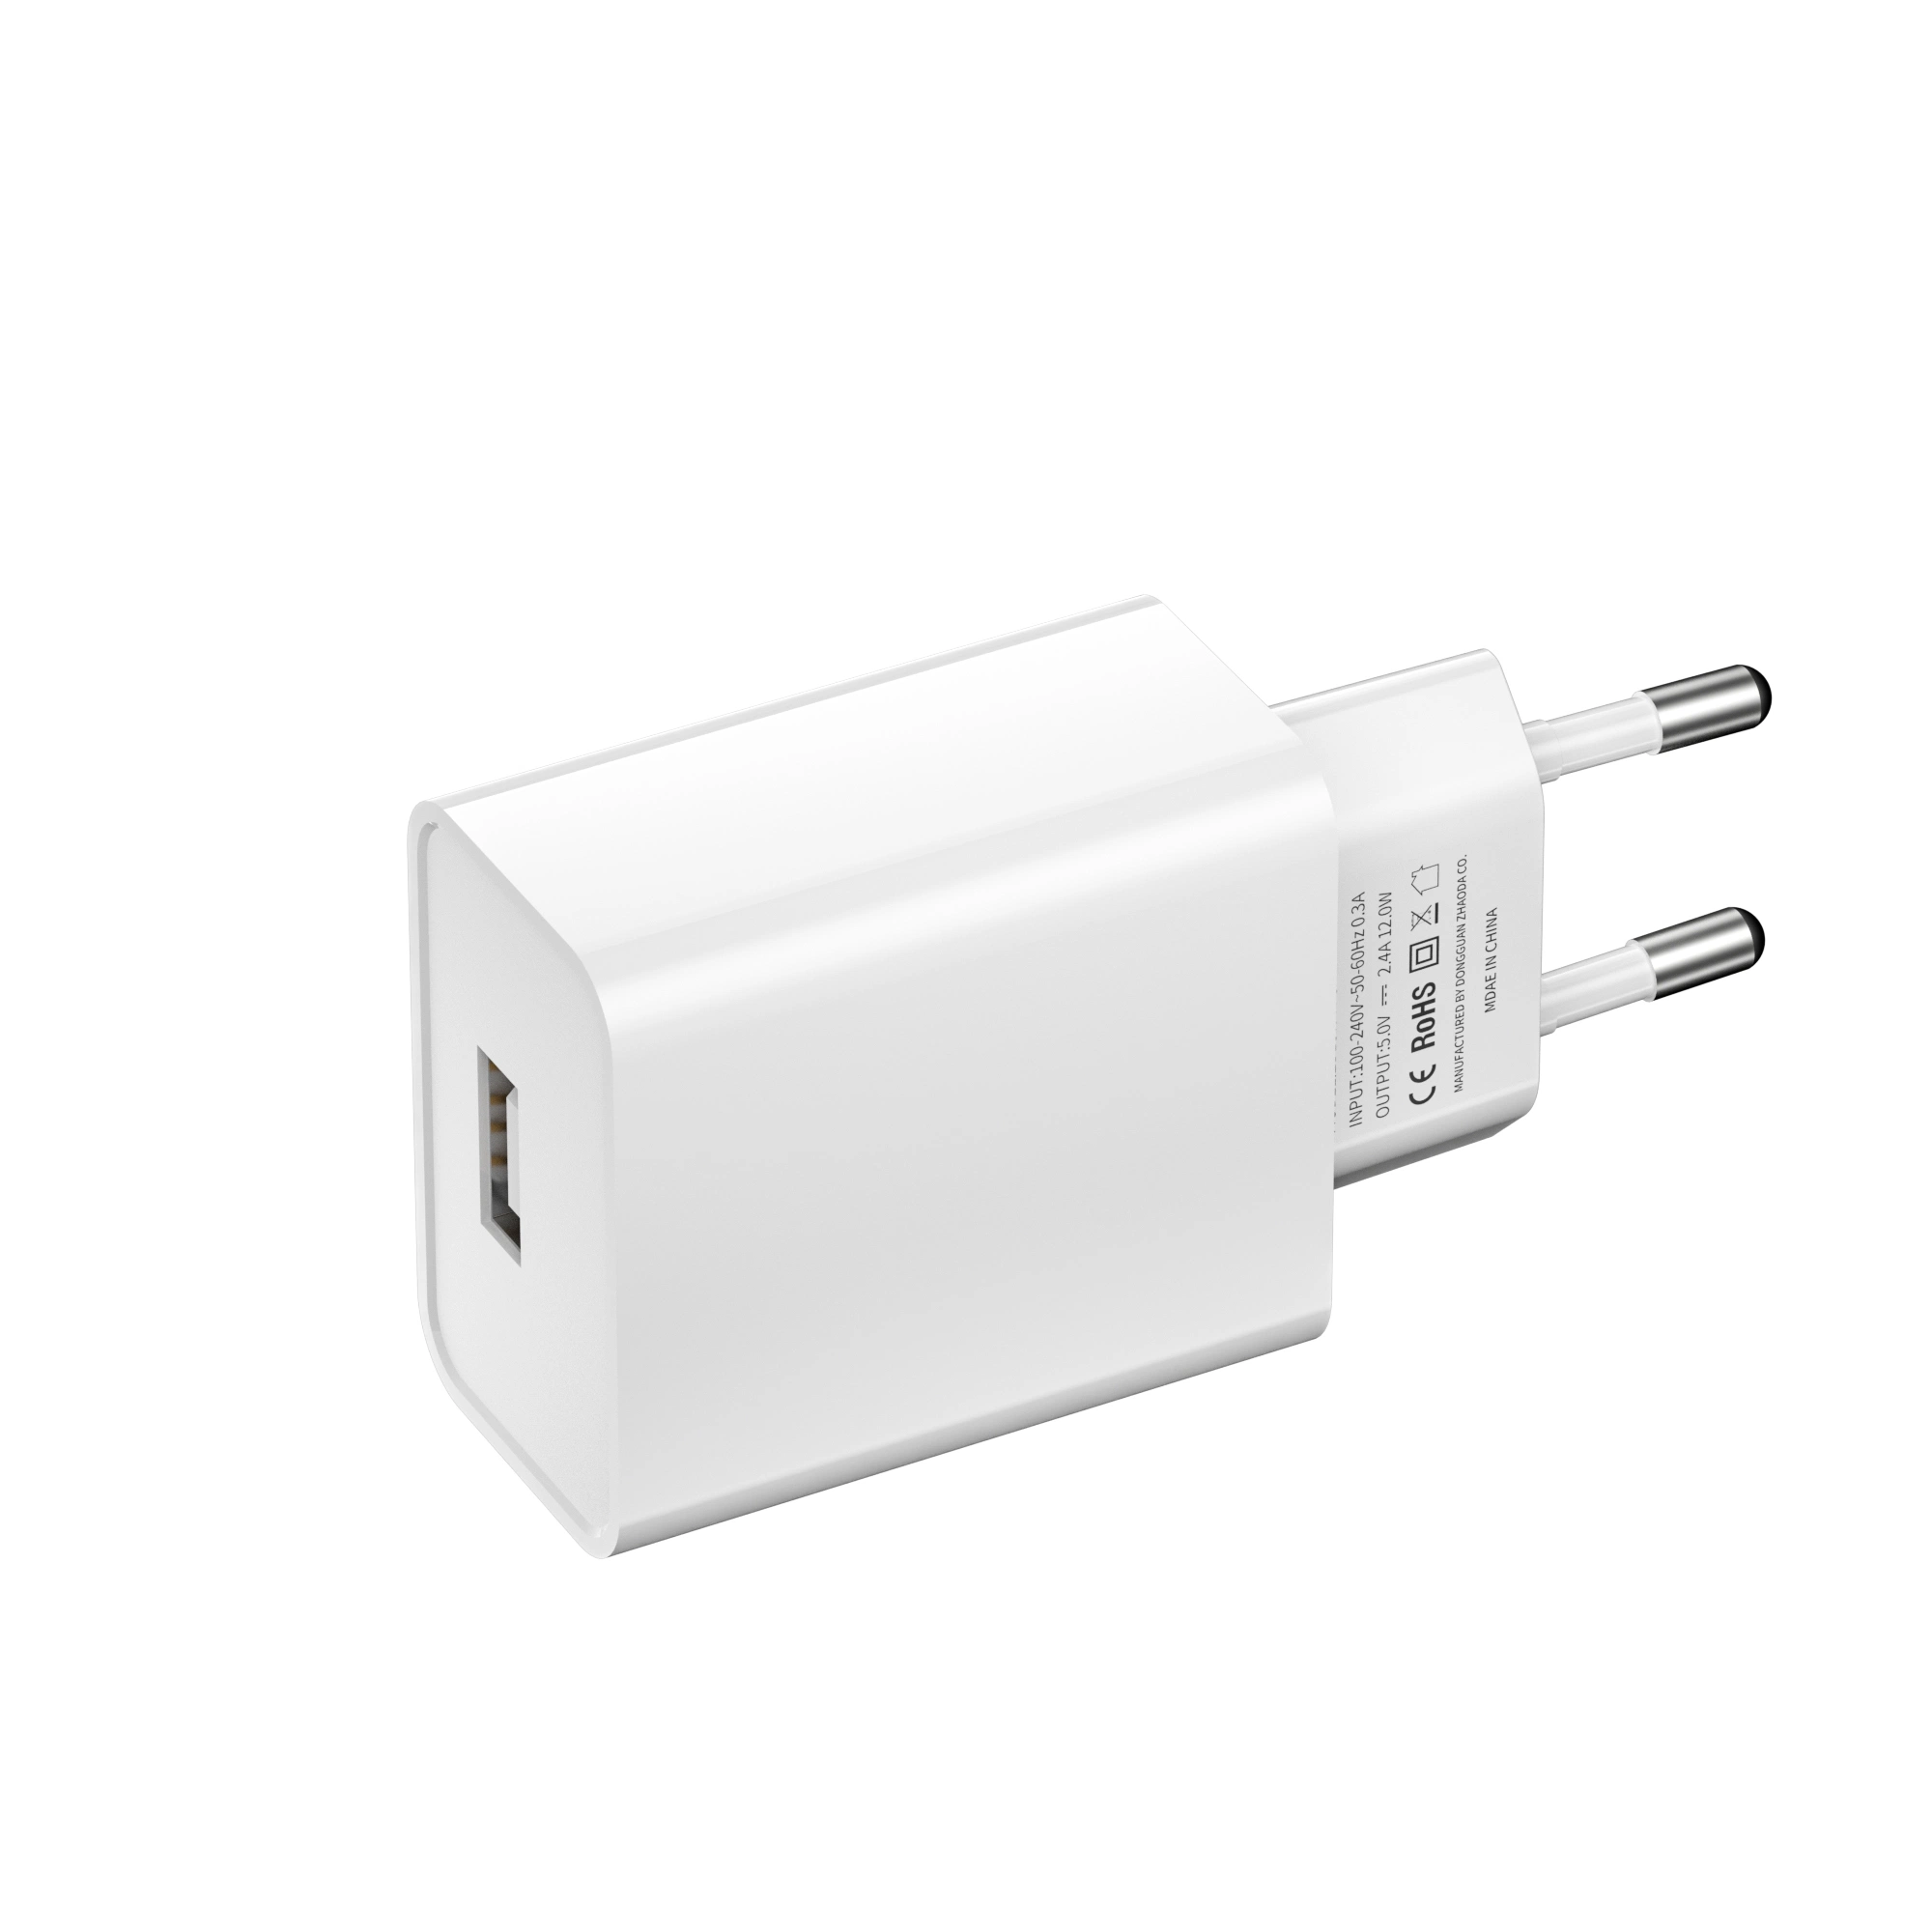 Fast Charging Charger Adapter 12W USB Port Quick Charger Adaptor Phone Charger 5. V/2.4A EU Plug